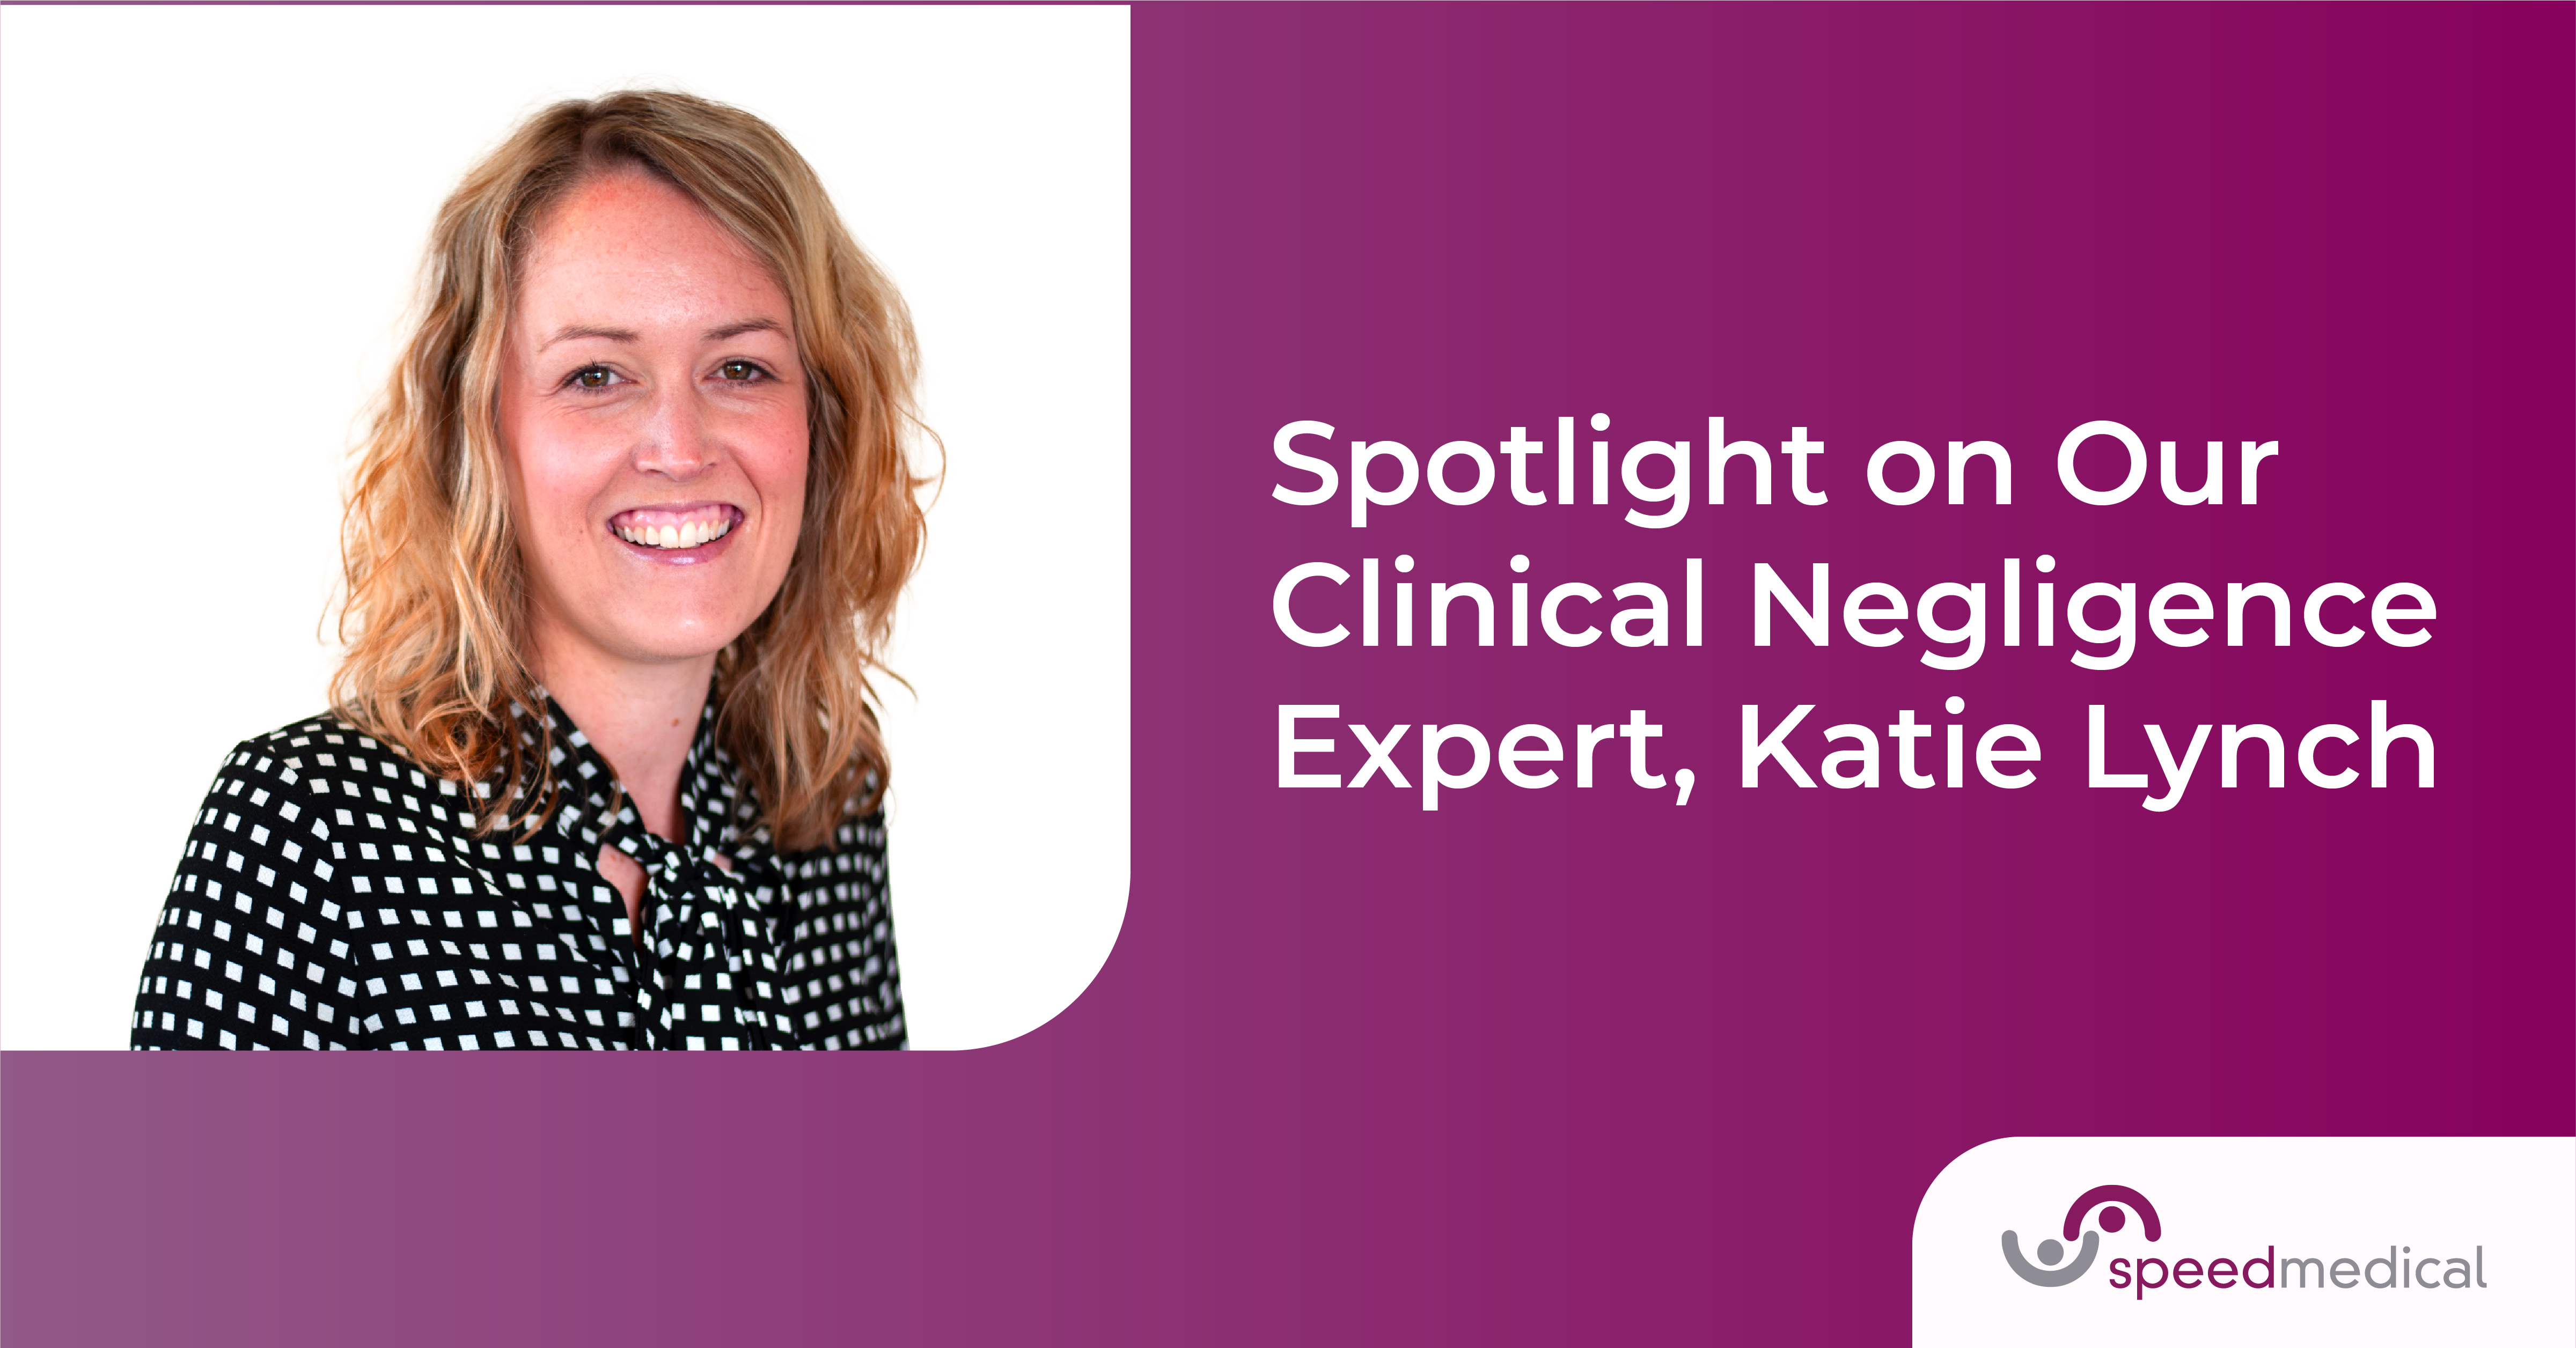 Spotlight on Our Clinical Negligence Expert, Katie Lynch